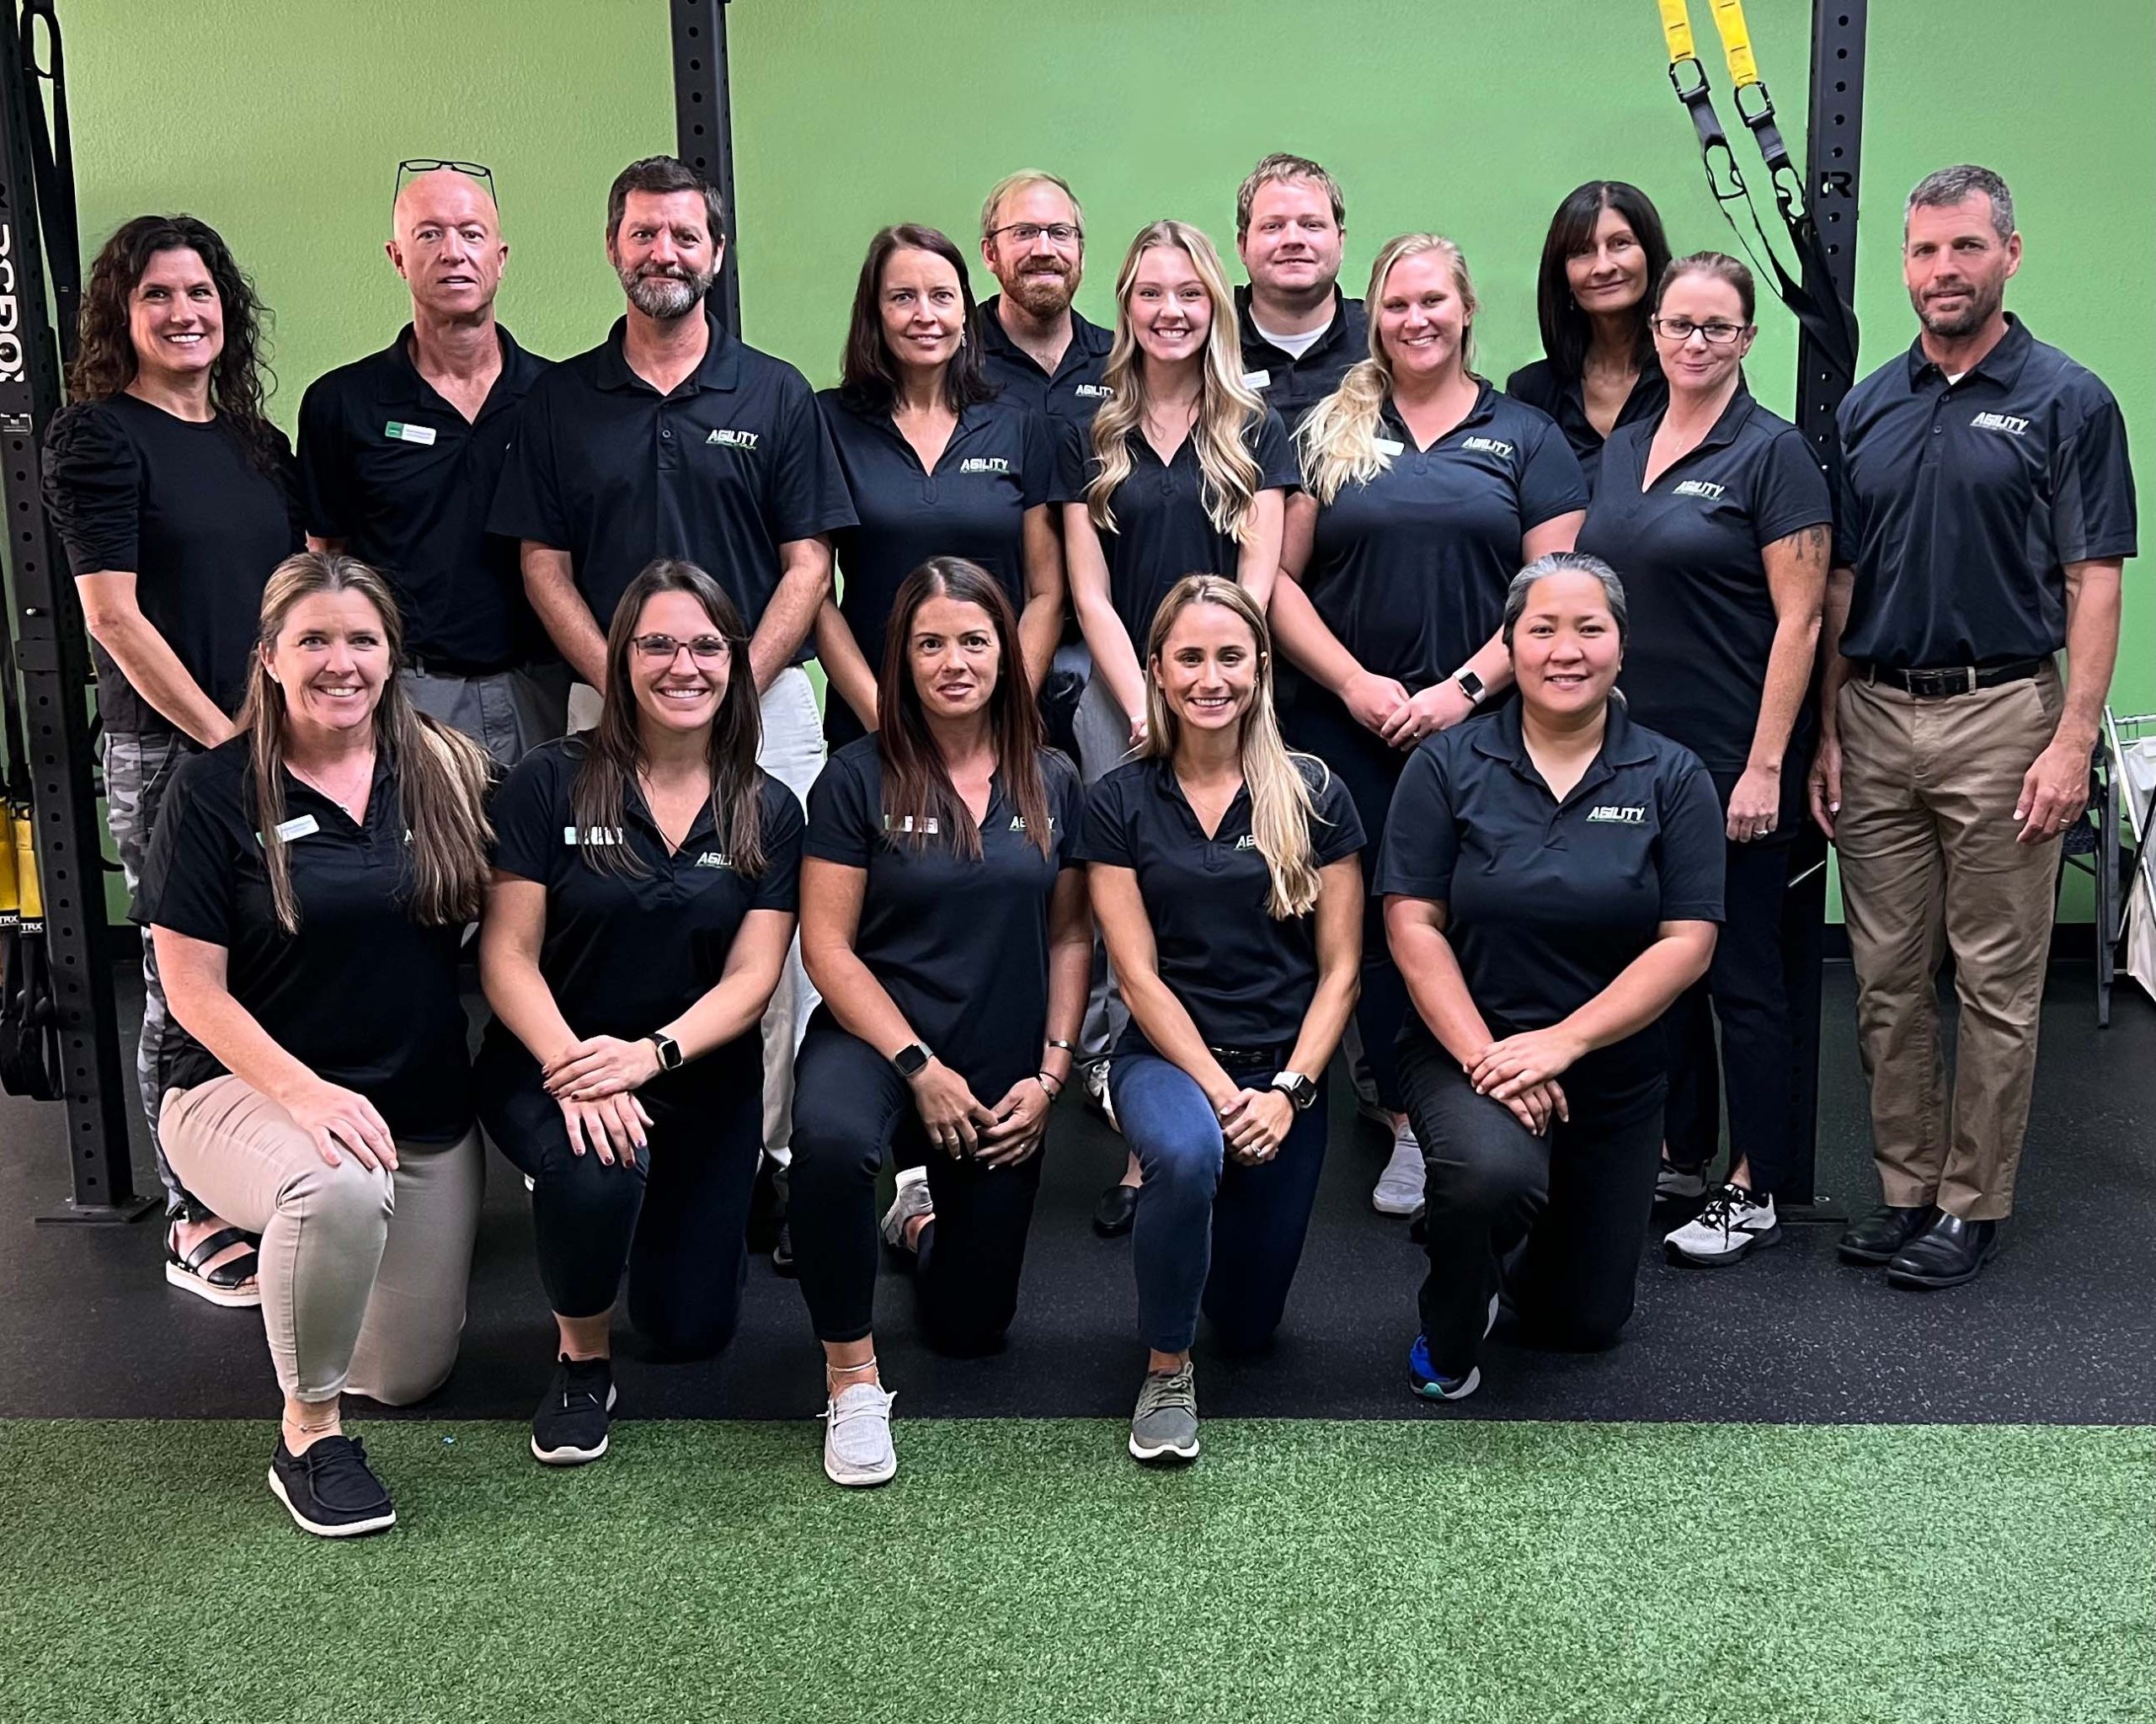 Fully leased Downtown Wellen announces addition of Agility Physical Therapy  - Wellen Park